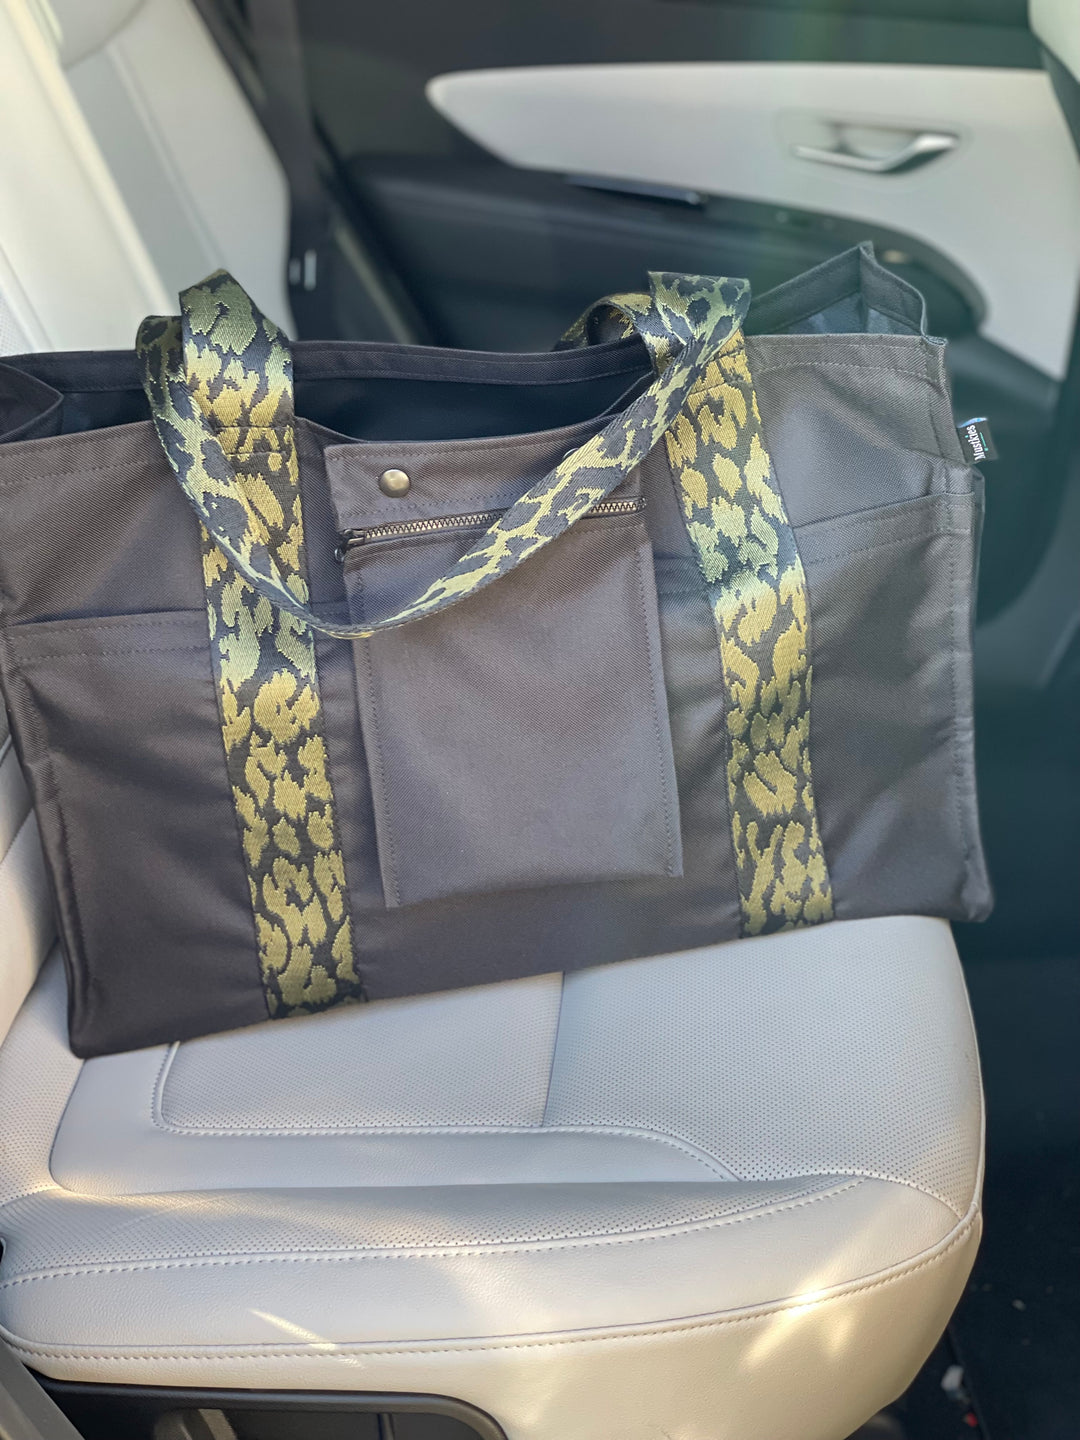 Mustkies Travel Tote in a black waterproof canvas and finished with a green camouflage strap.